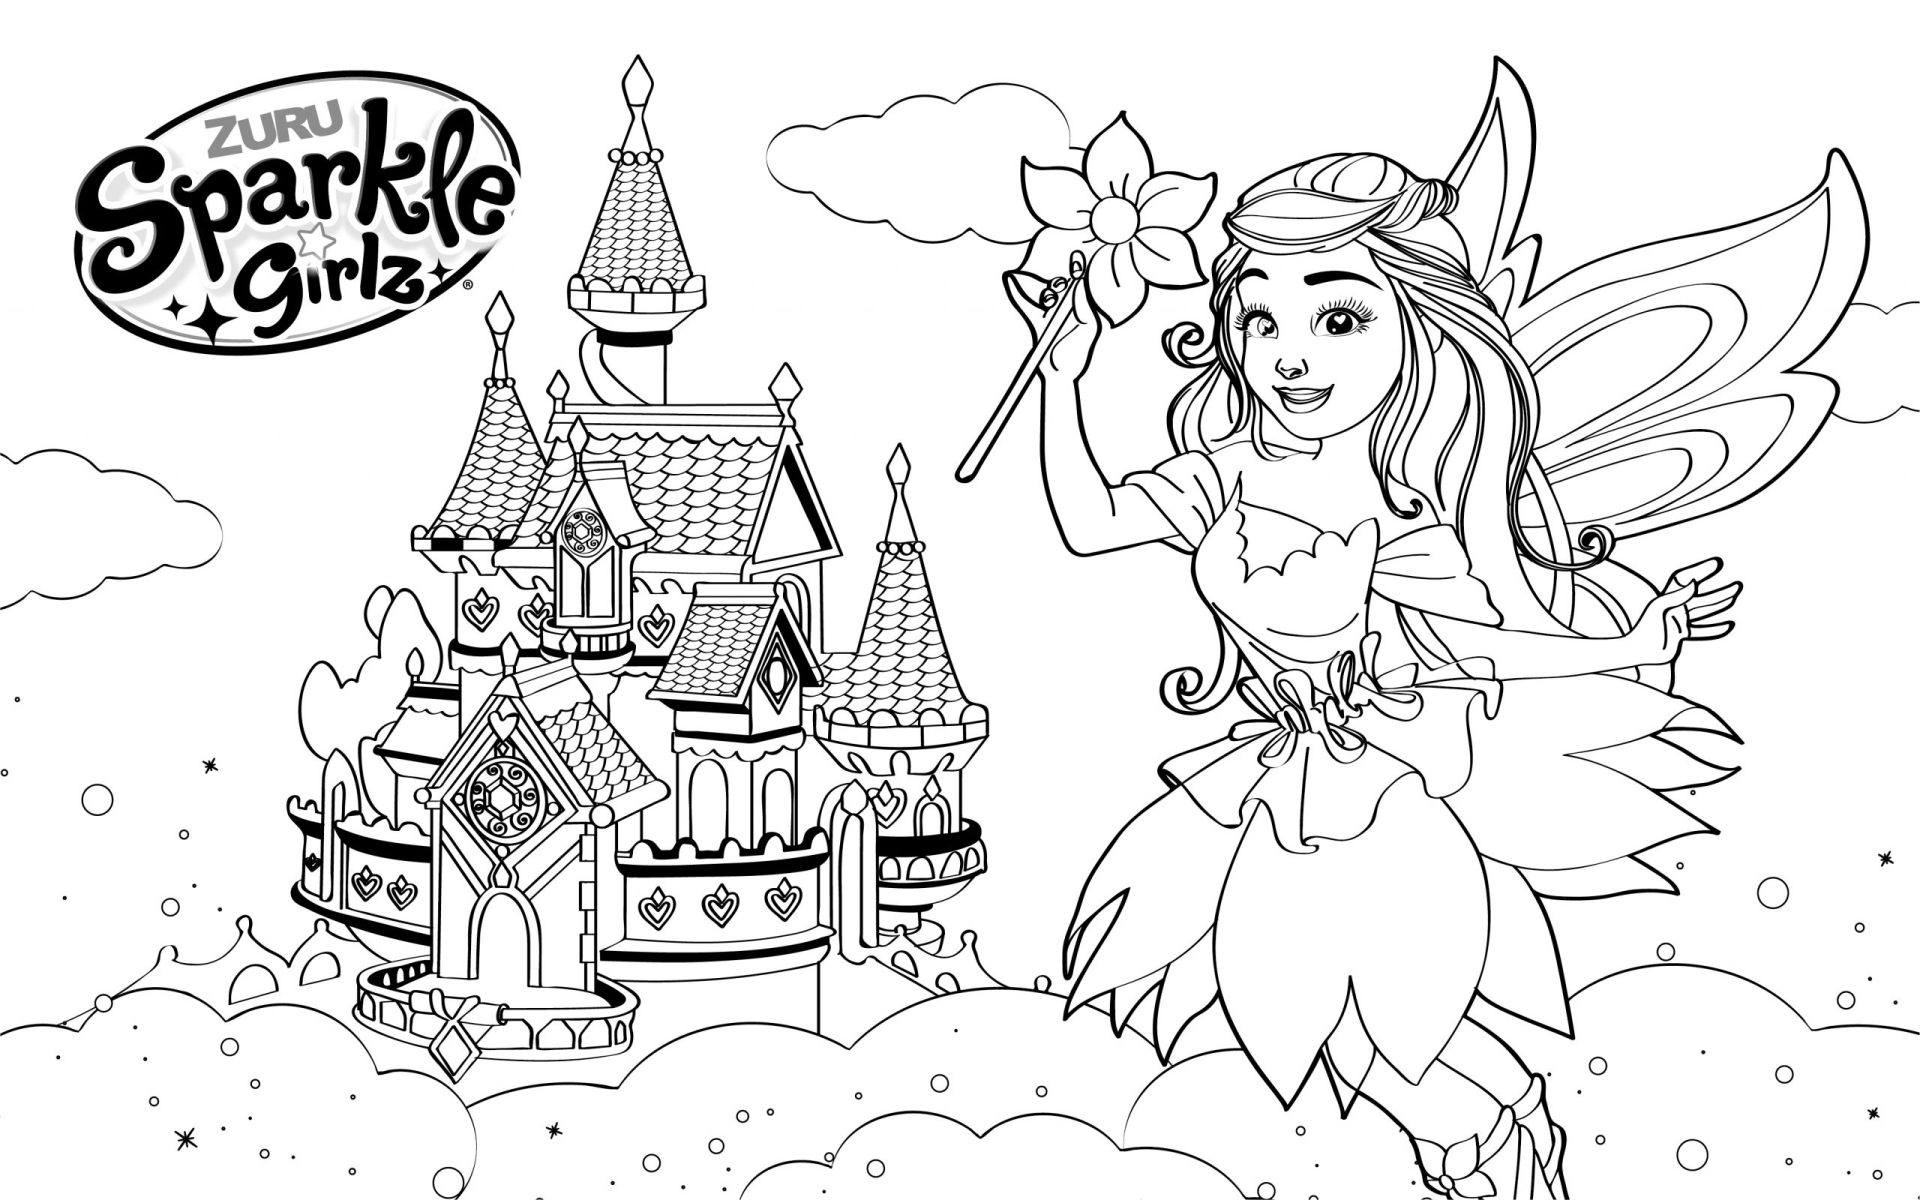 Colouring-page-sparkle-girlz-04